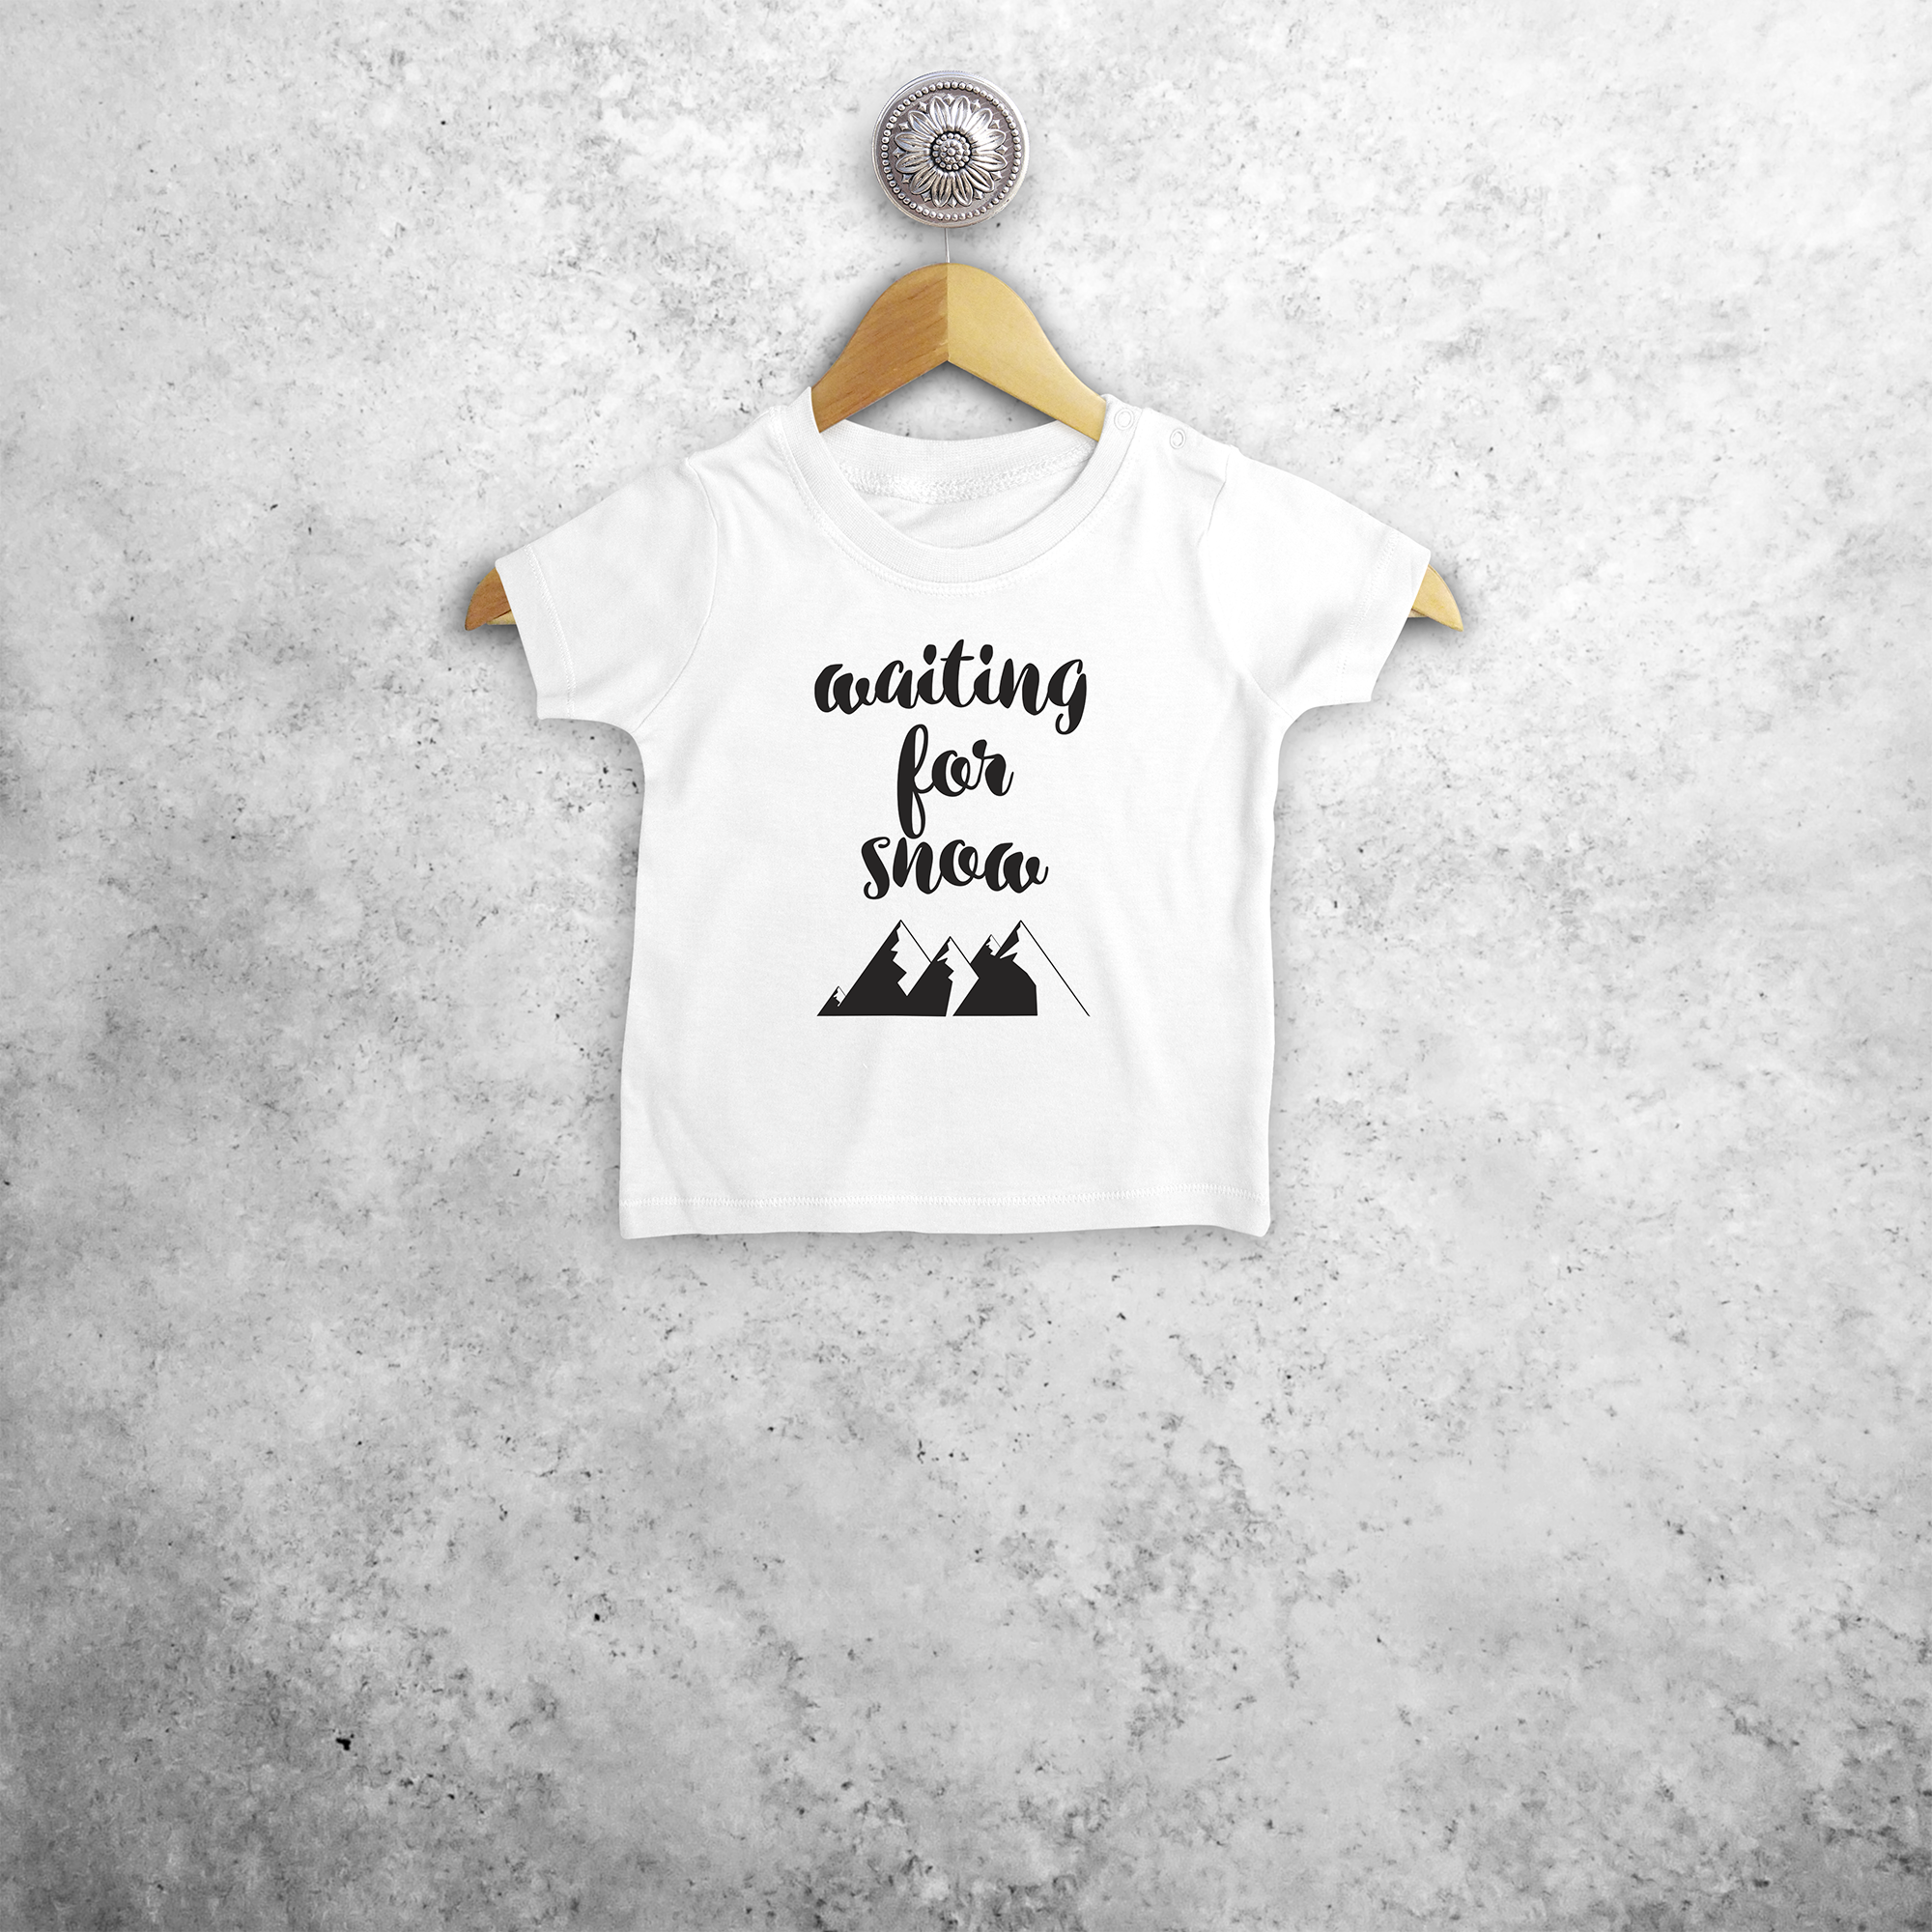 Baby or toddler shirt with short sleeves, with ‘Waiting for snow’ print by KMLeon.